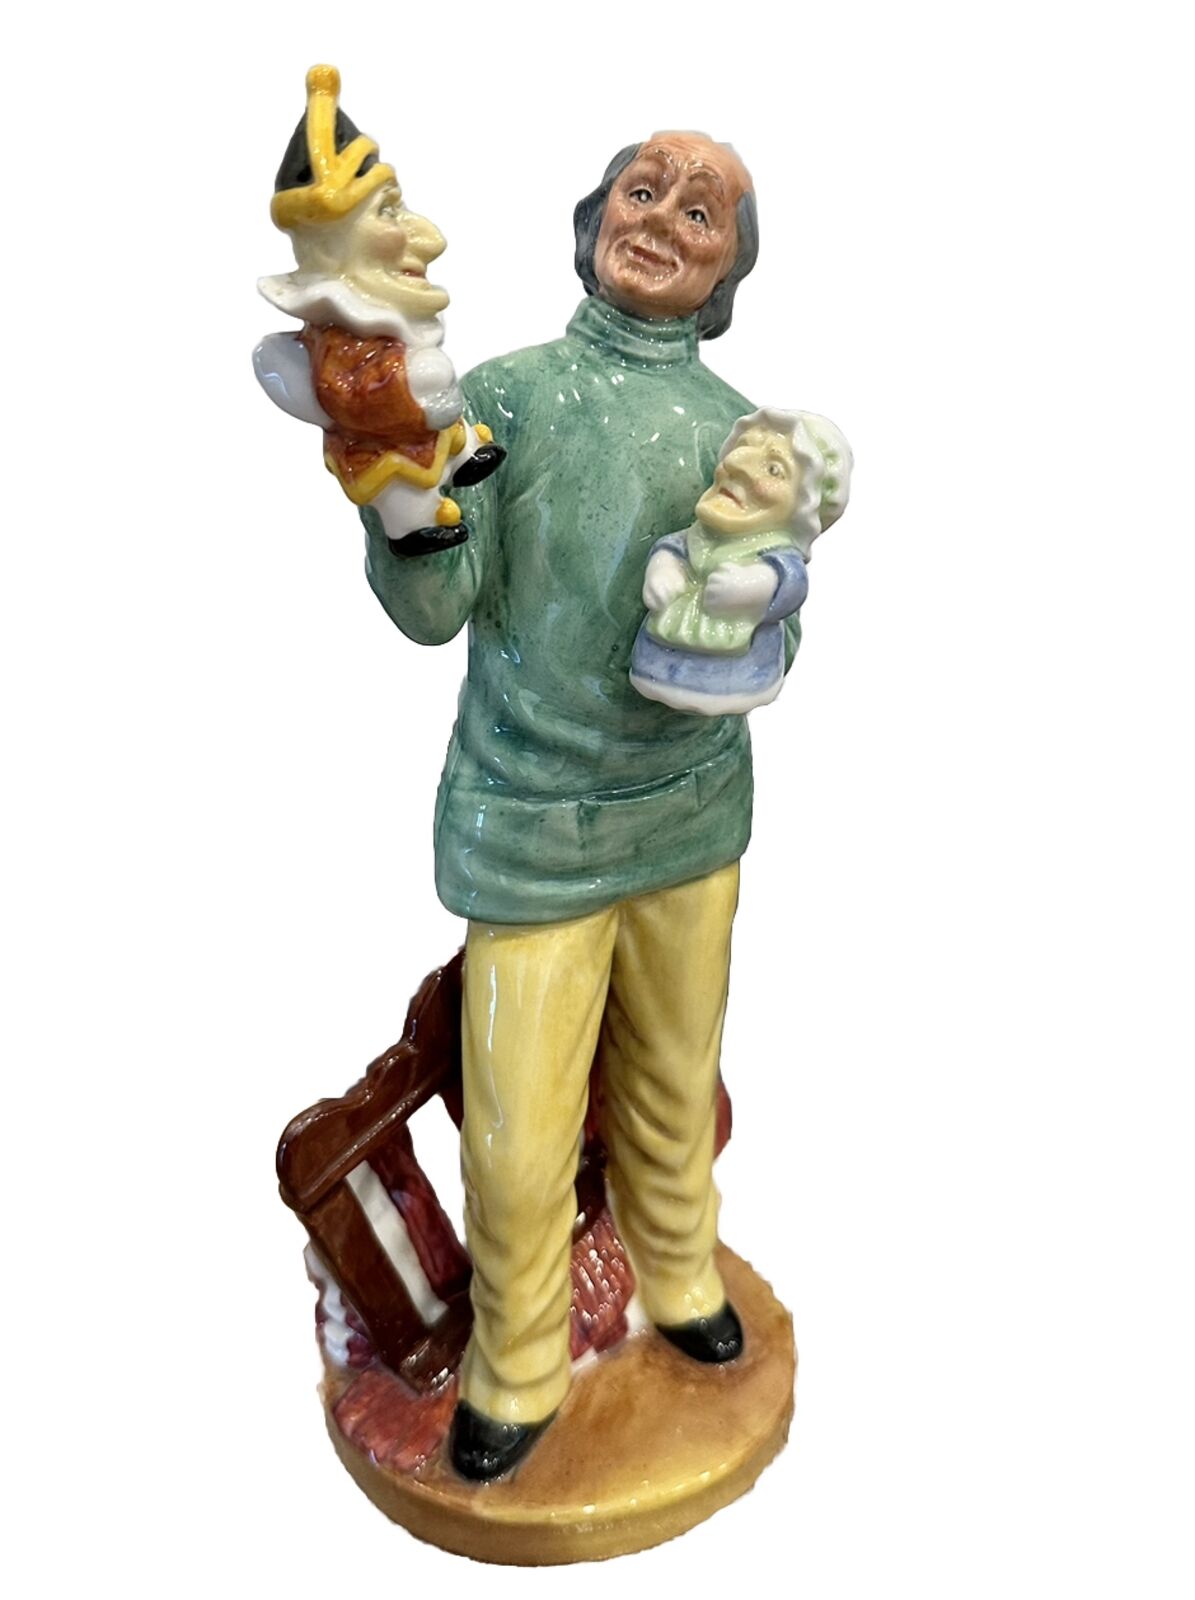 REAL Royal Doulton Figurine Punch And Judy Man HN 2765 1980 Authentic